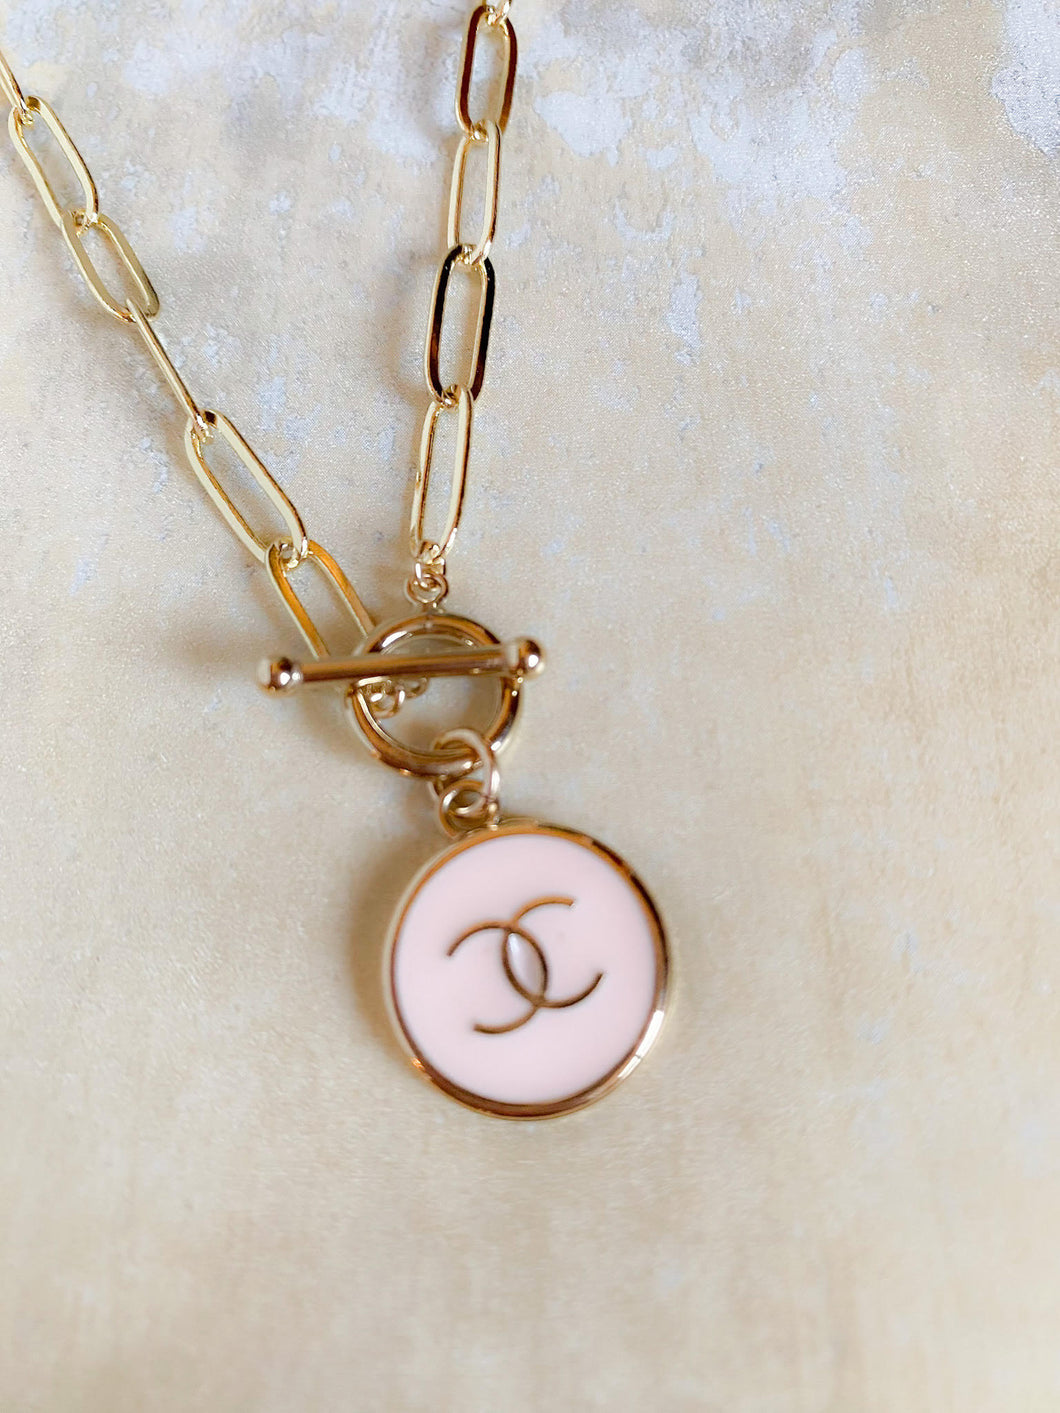 Gold CC Necklace with pendant